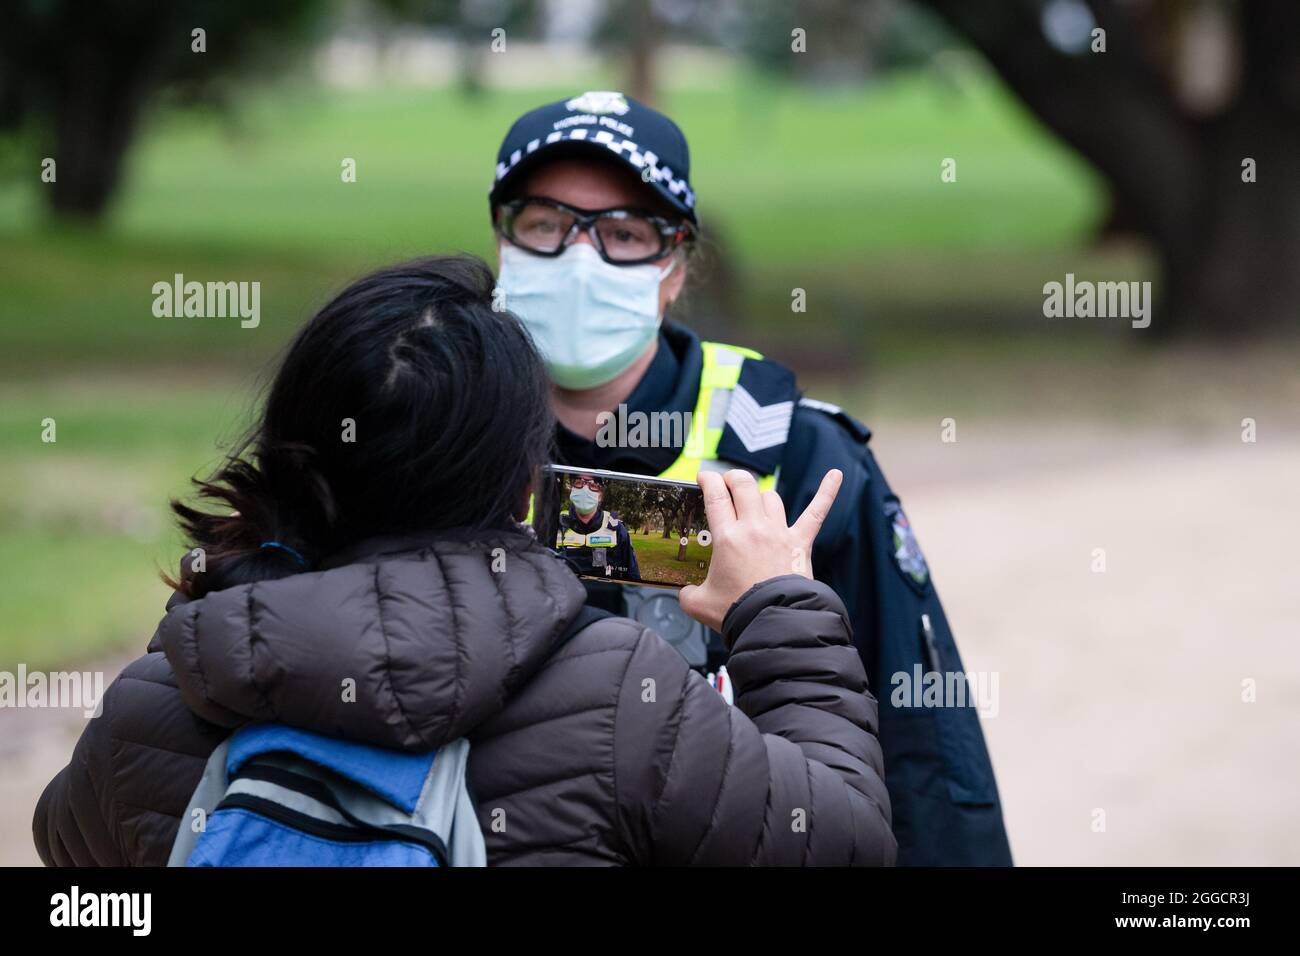 Melbourne, Australia, 31 August, 2021. A female protester films a police officer as she is questioned during a protest organised by Karen Brewer a New Zealand proprotor of Freemason conspiracy theory's, most demonstrators were detained and fined before a protest could take place. Credit: Michael Currie/Speed Media/Alamy Live News Stock Photo